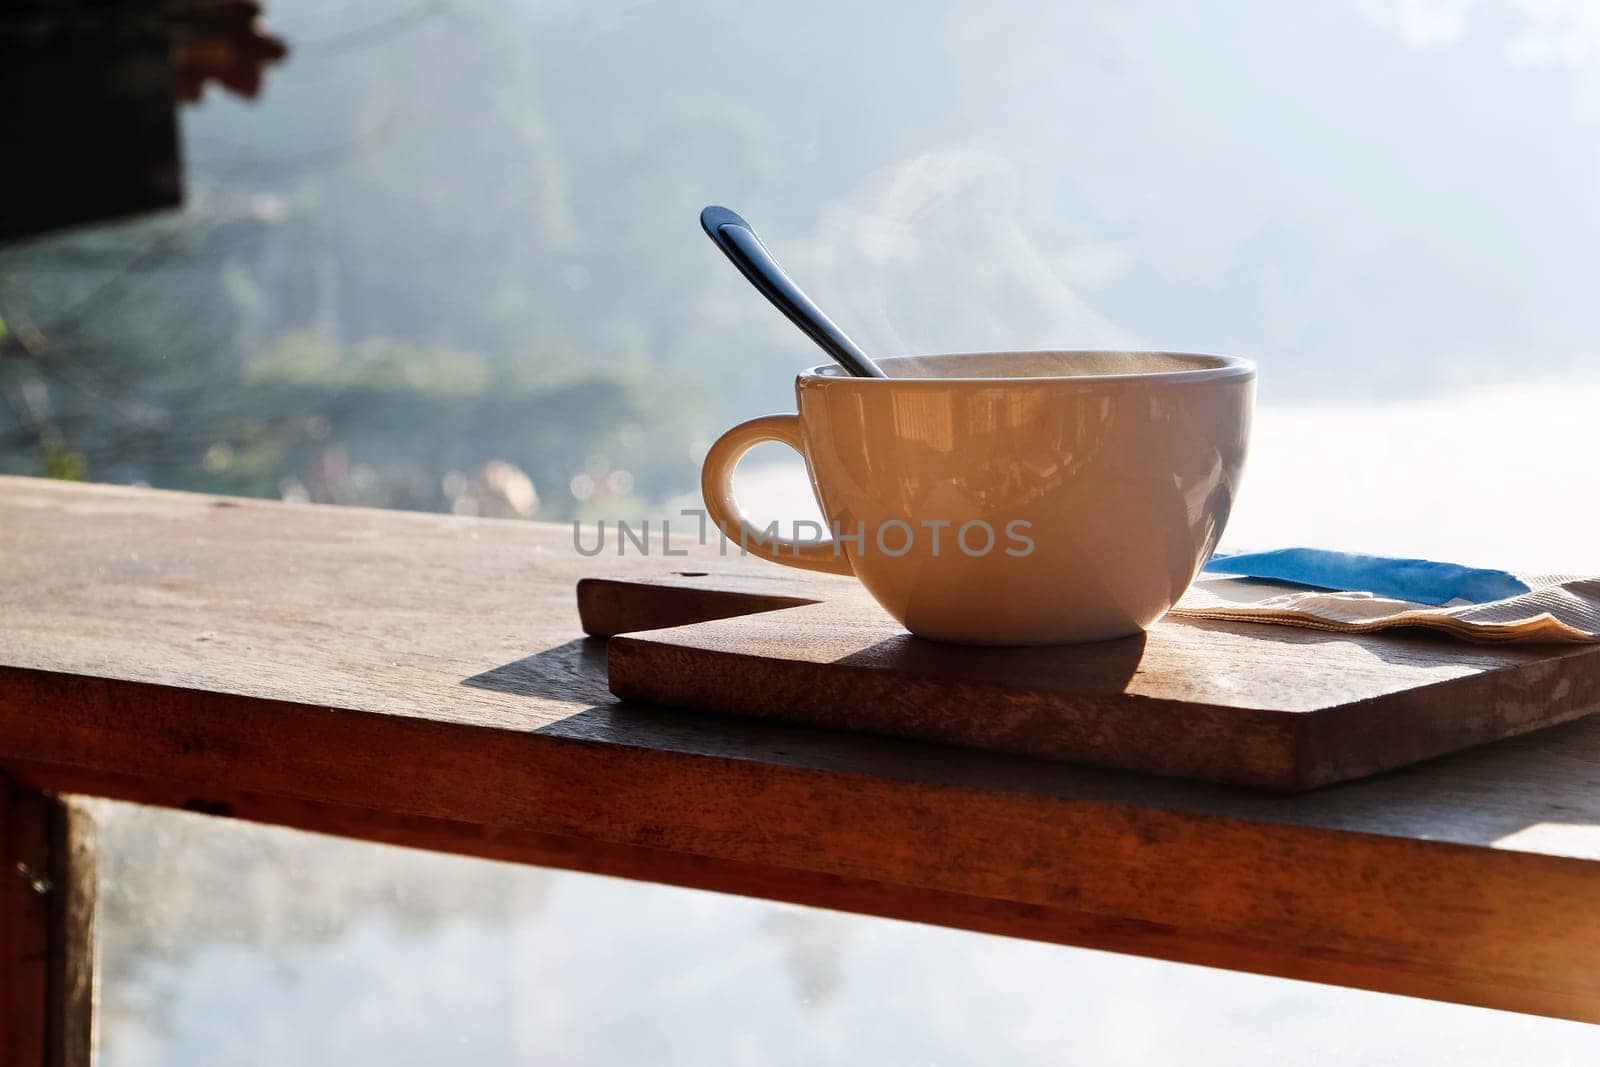 Coffee cup and napkin on wooden table in morning light by ponsulak